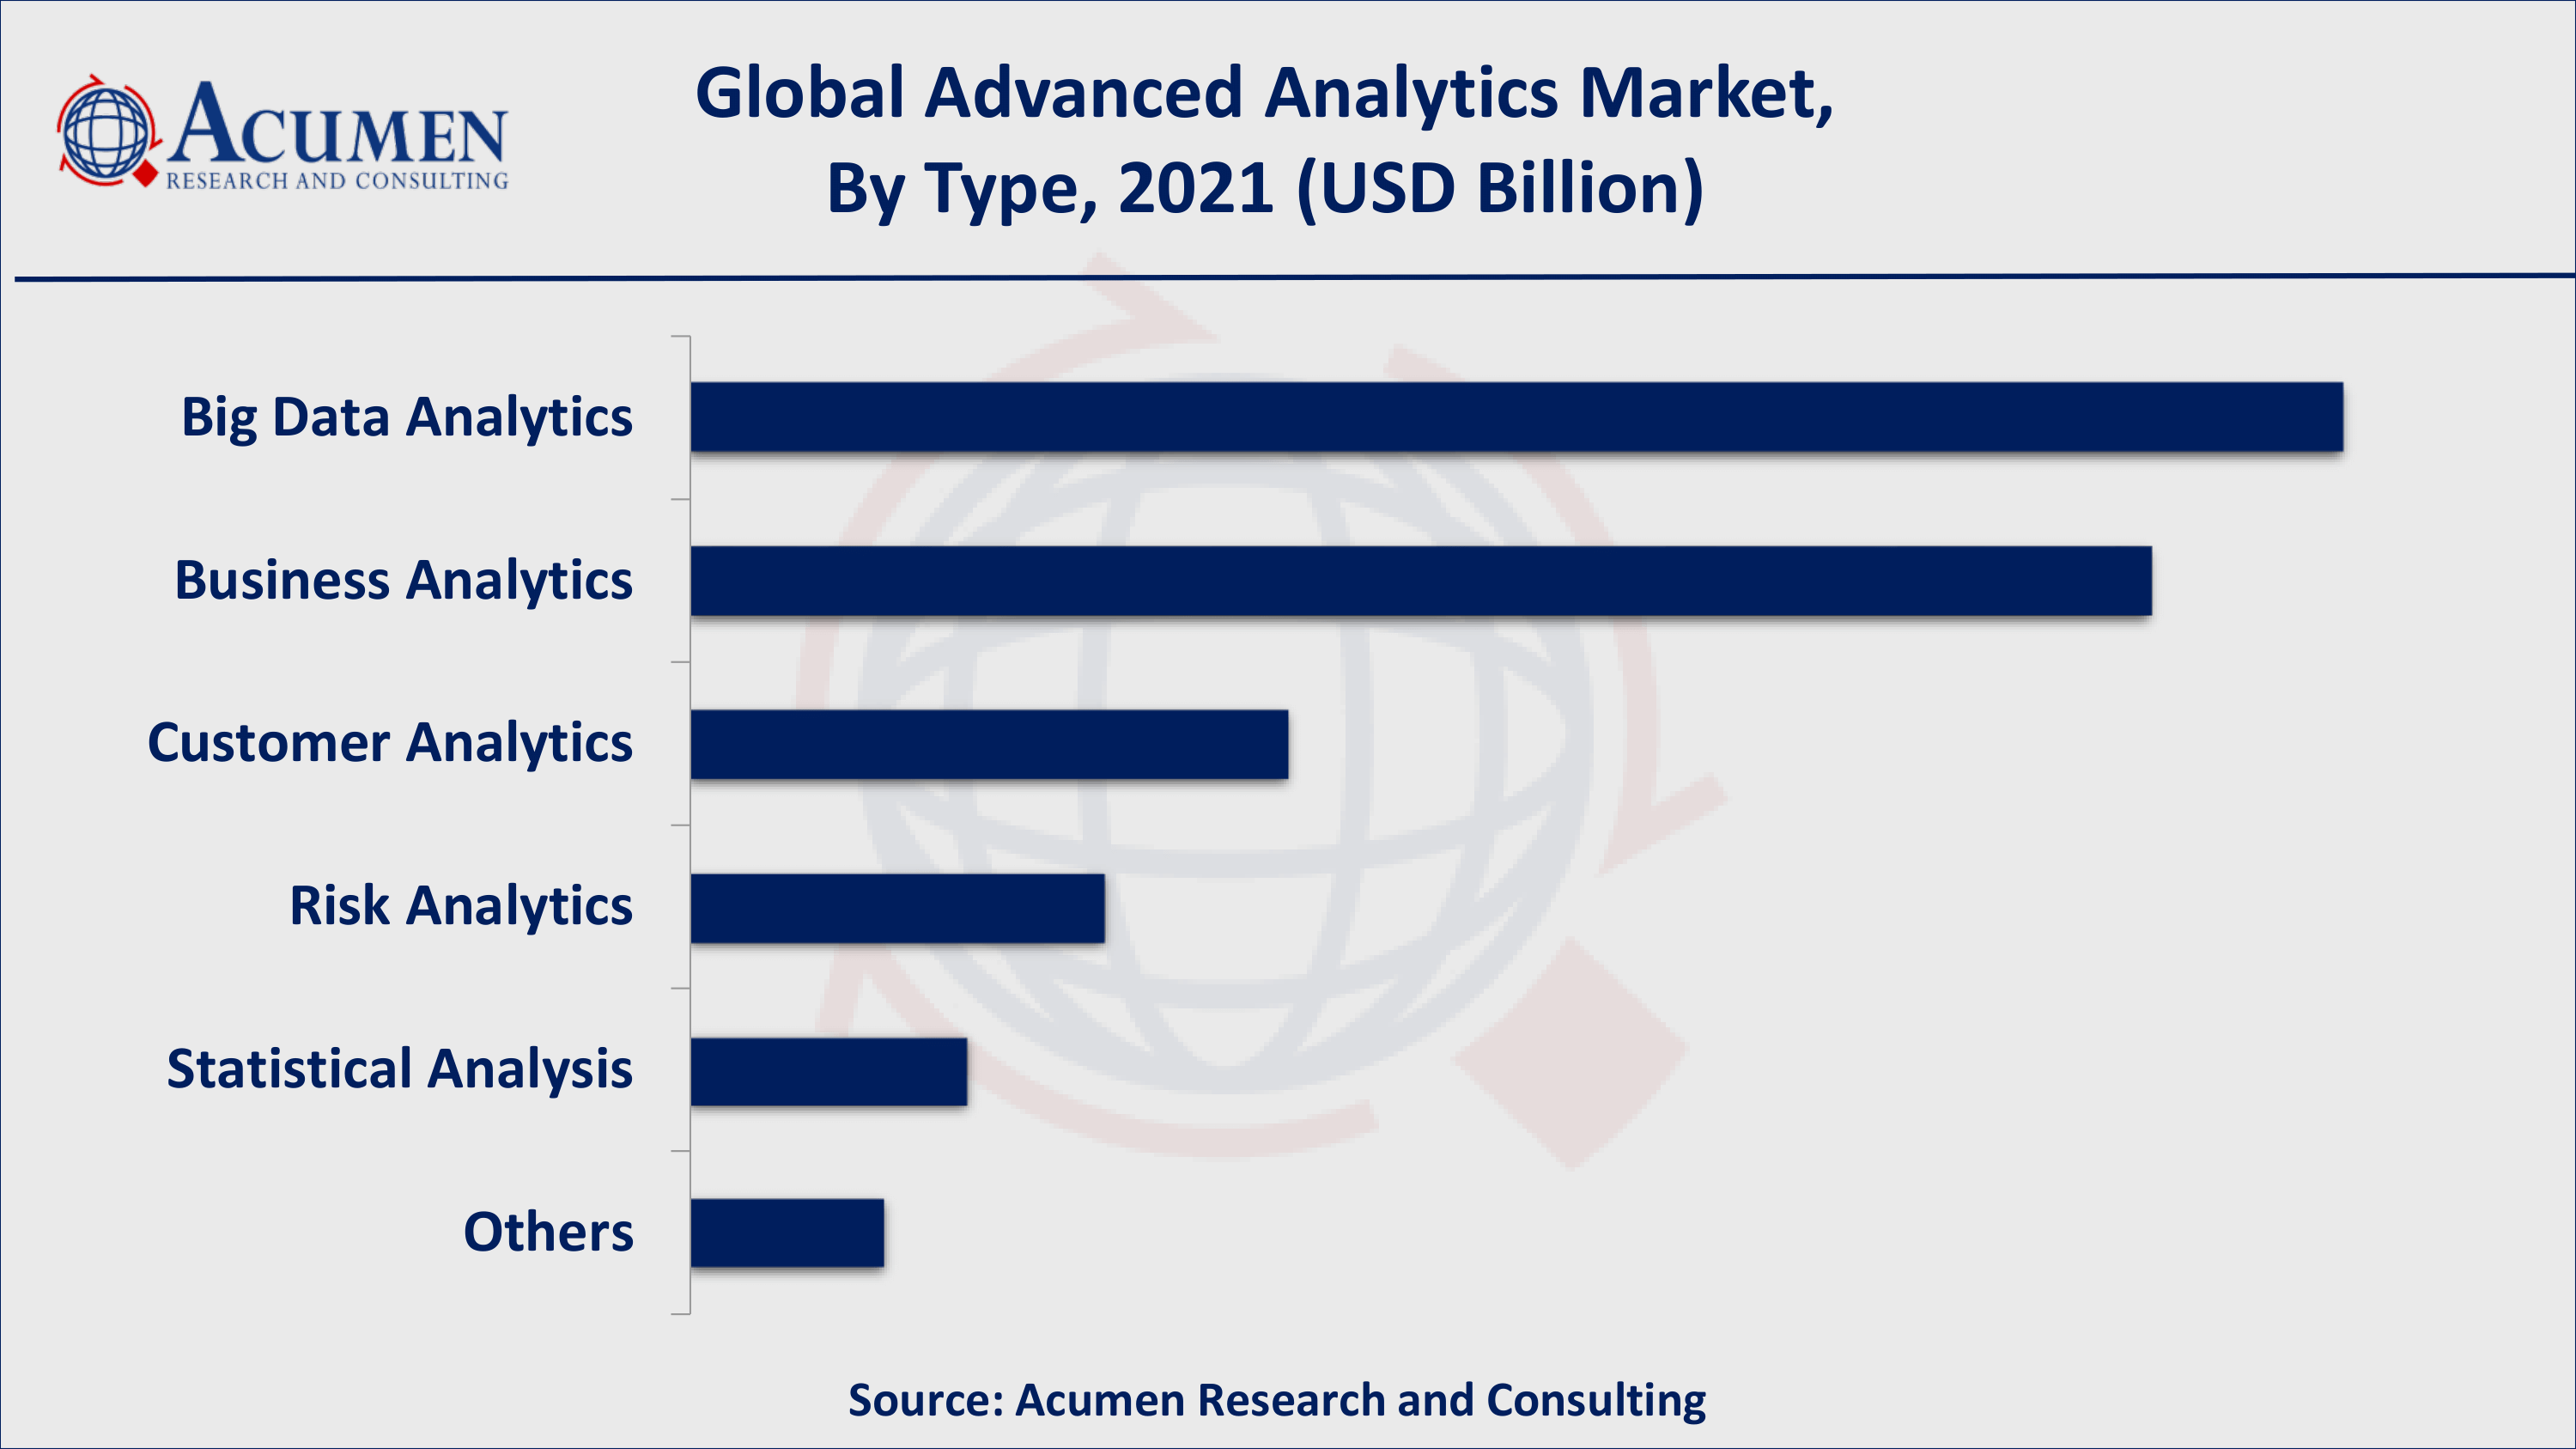 Based on type, big data analytics acquired over 36% of the overall market share in 2021